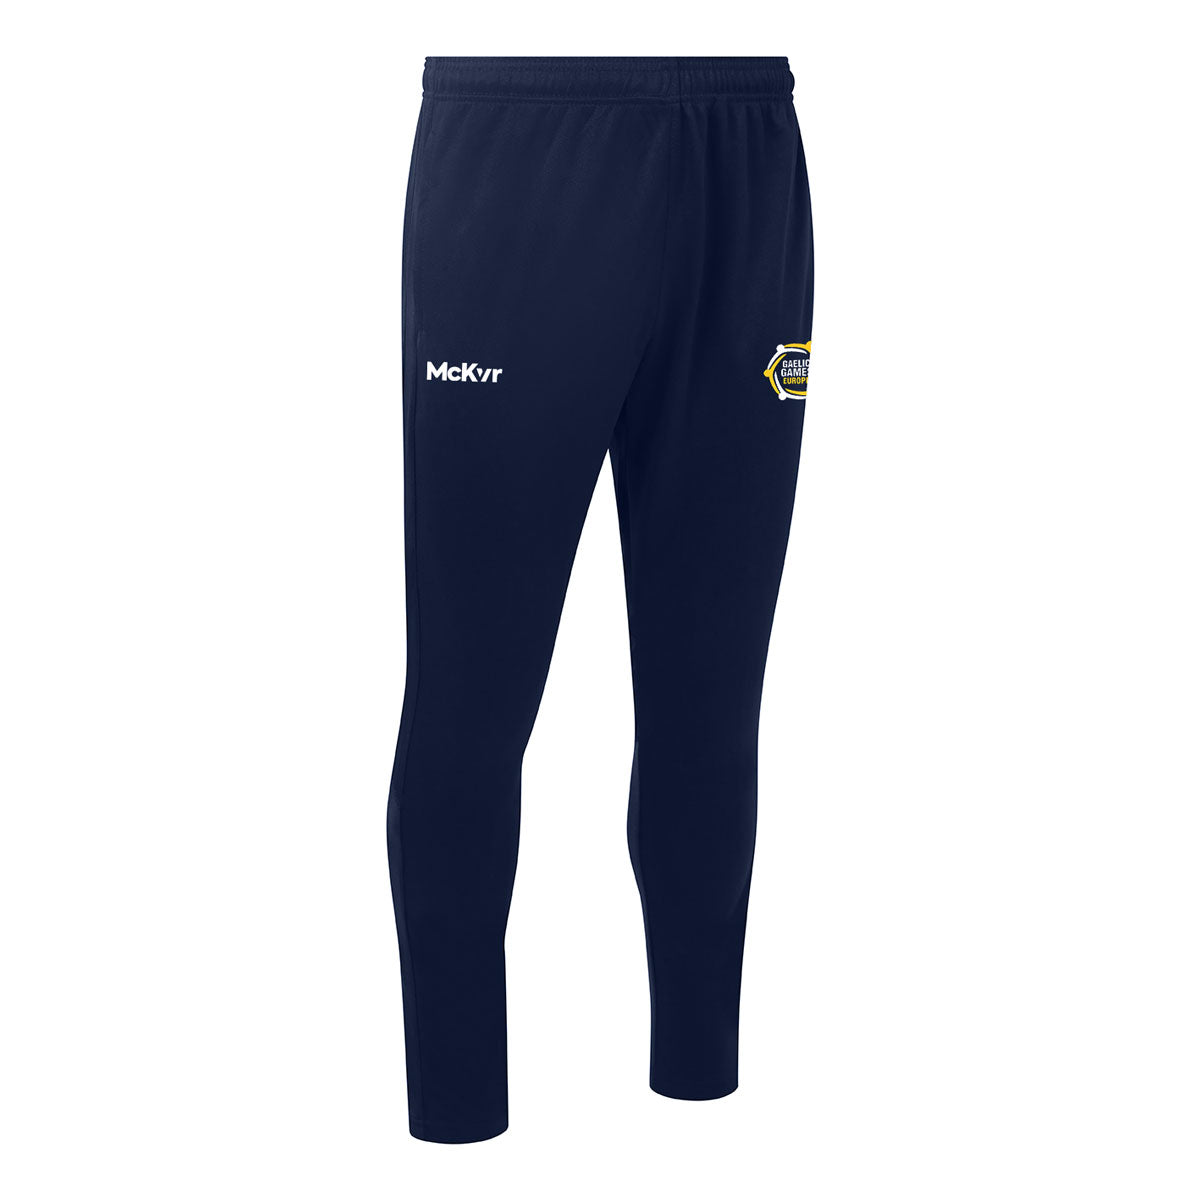 Mc Keever Gaelic Games Europe Core 22 Skinny Pants - Youth - Navy